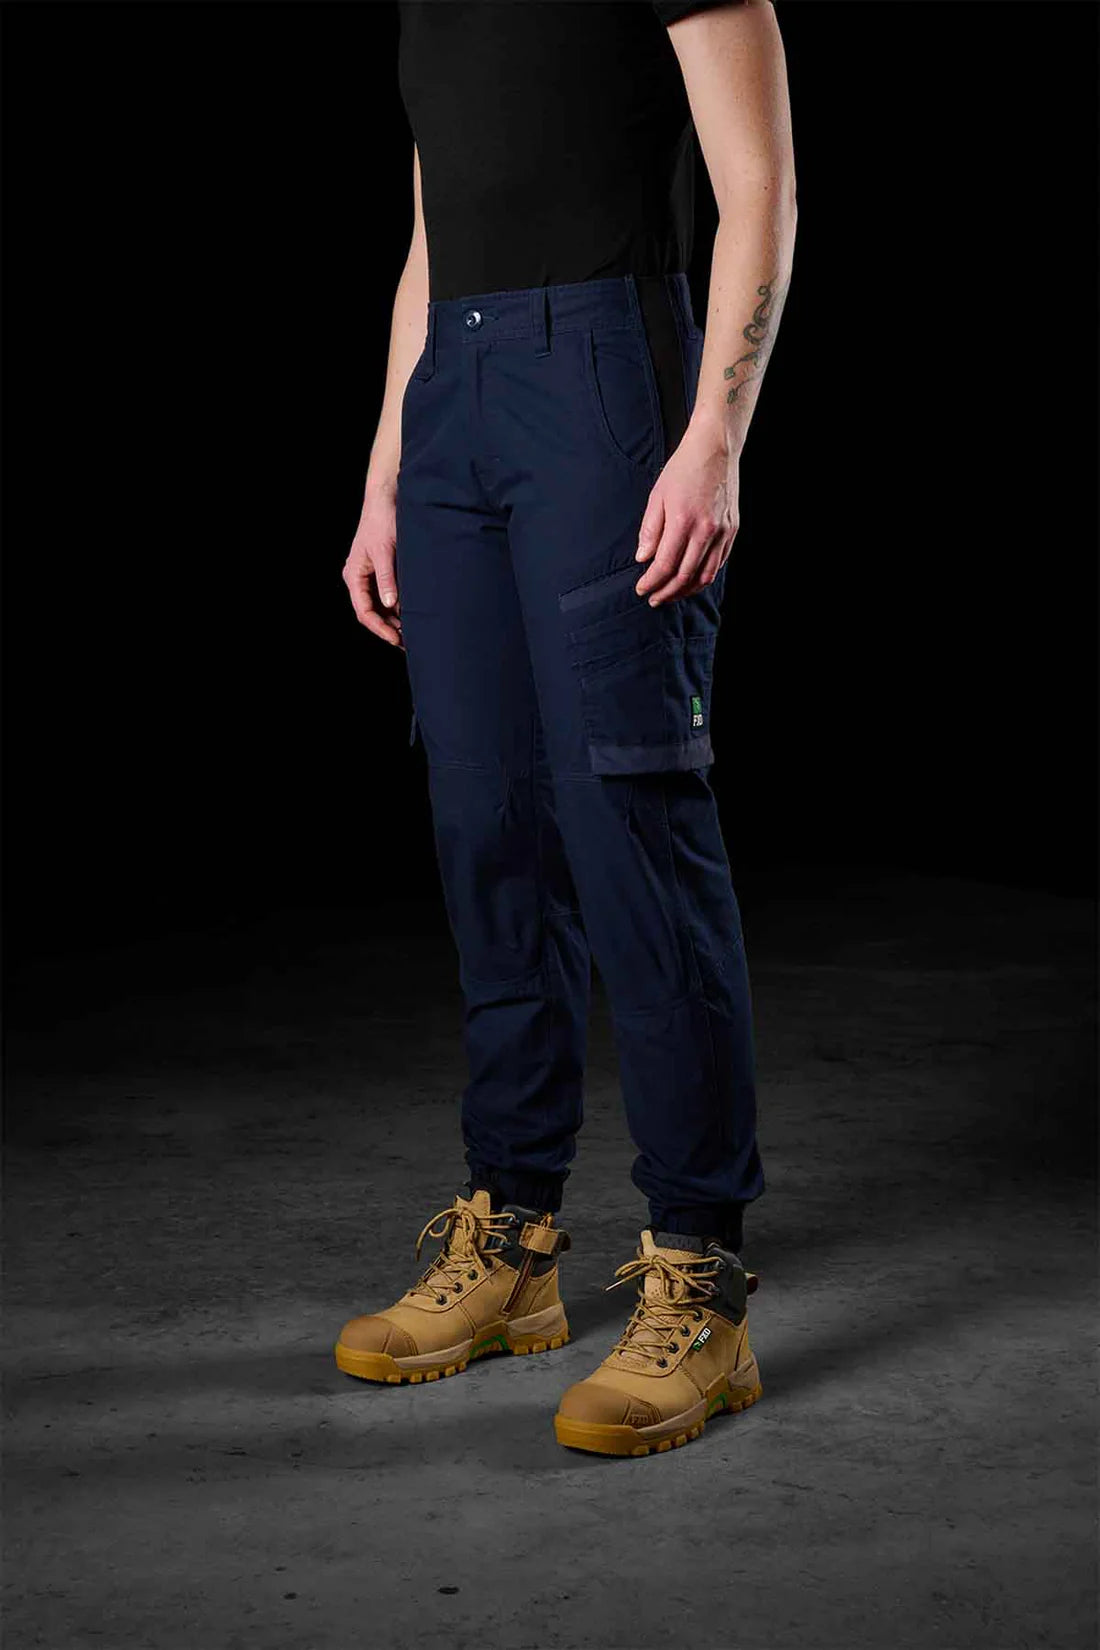 Ladies Cuffed Ripstop Stretch Work Pants - made by FXD Workwear